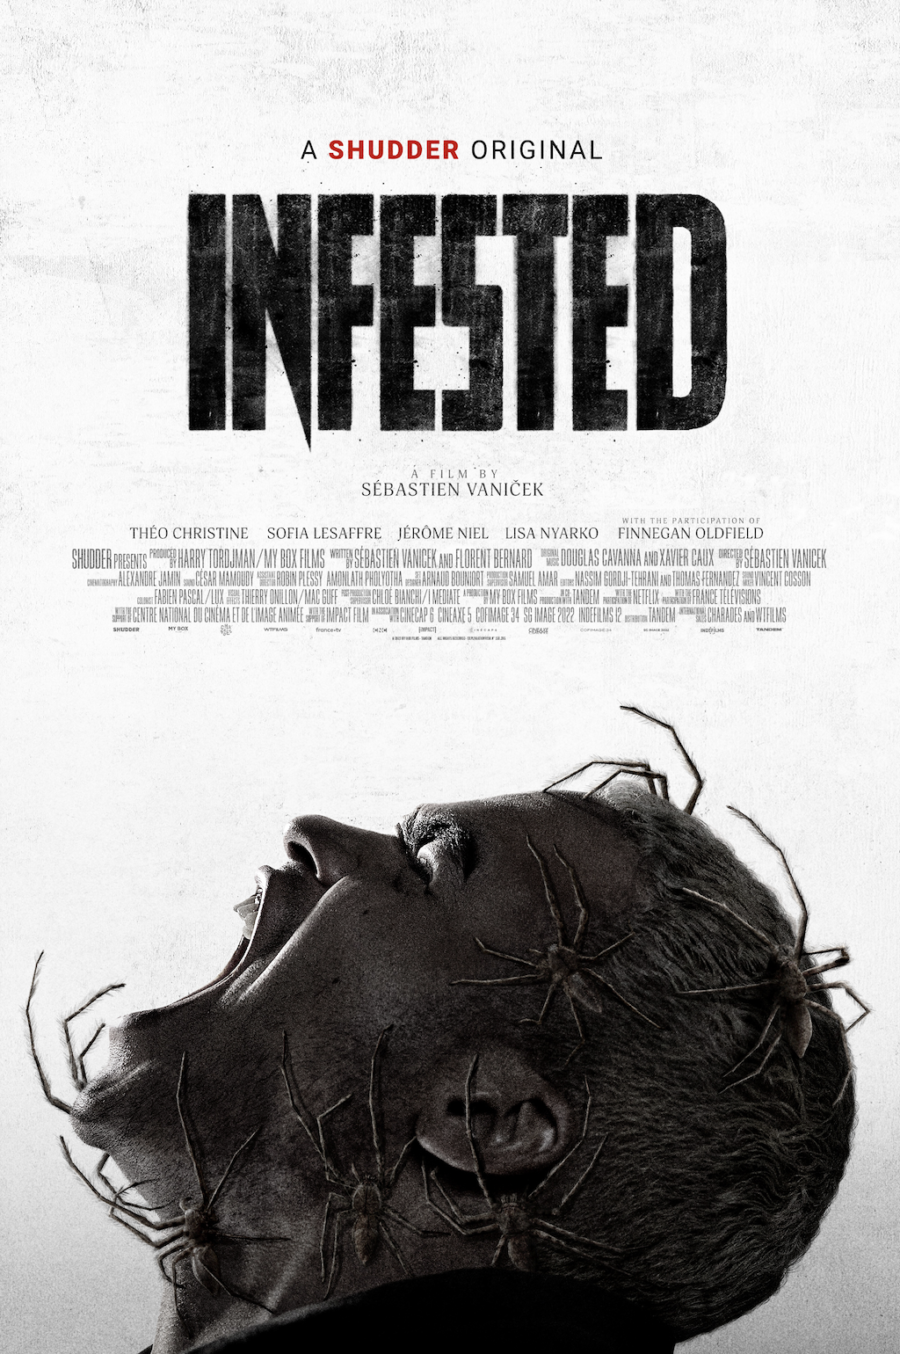 Infested poster